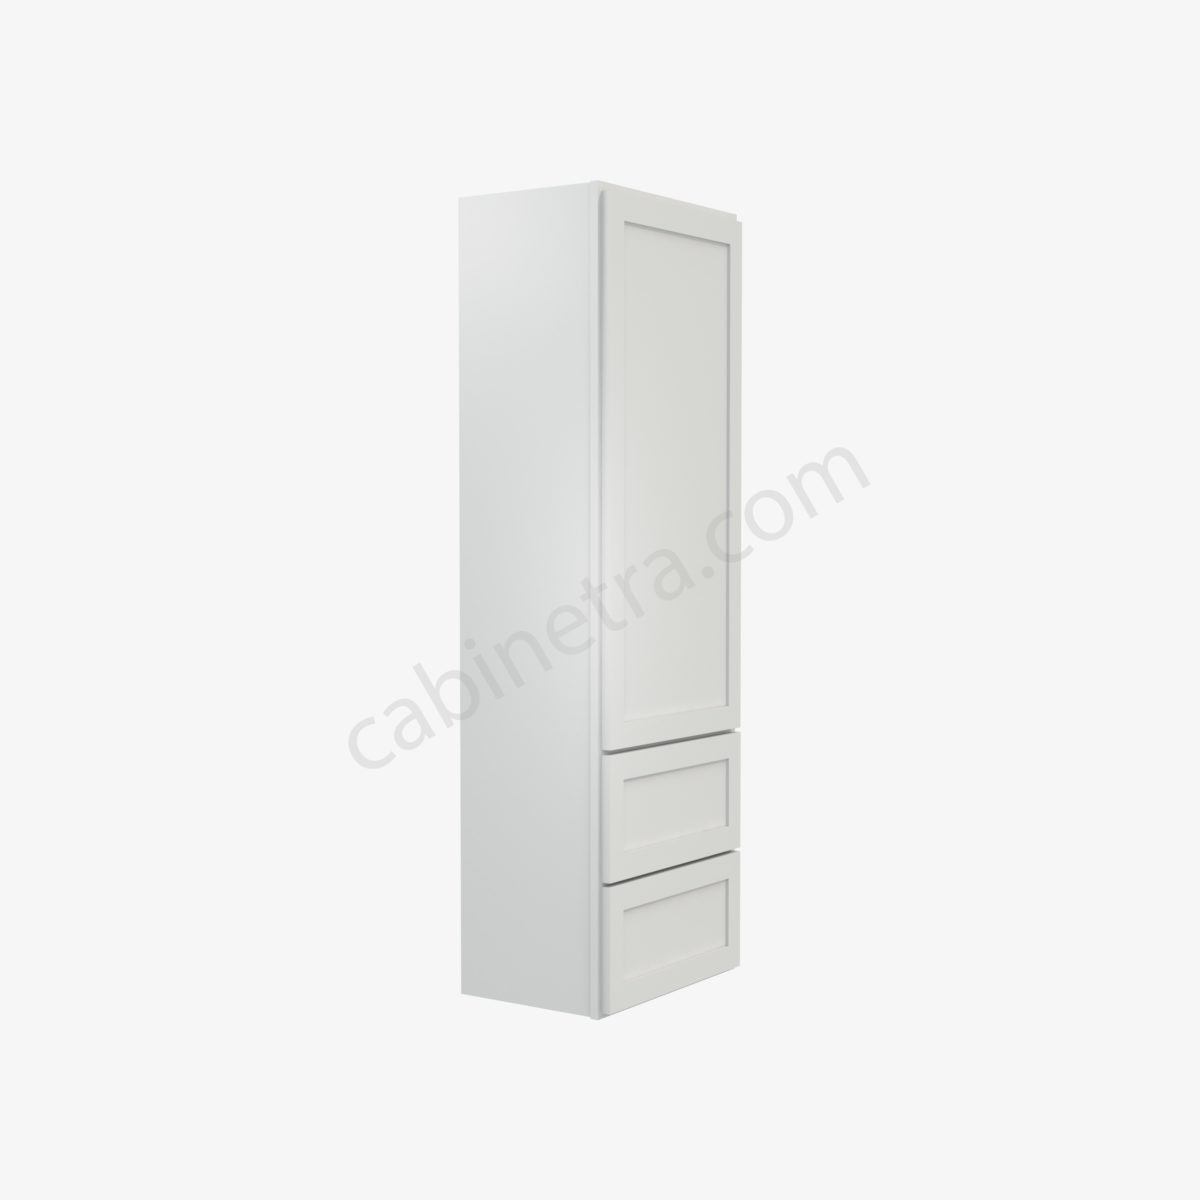 AW W2D1860 4 Forevermark Ice White Shaker Cabinetra scaled